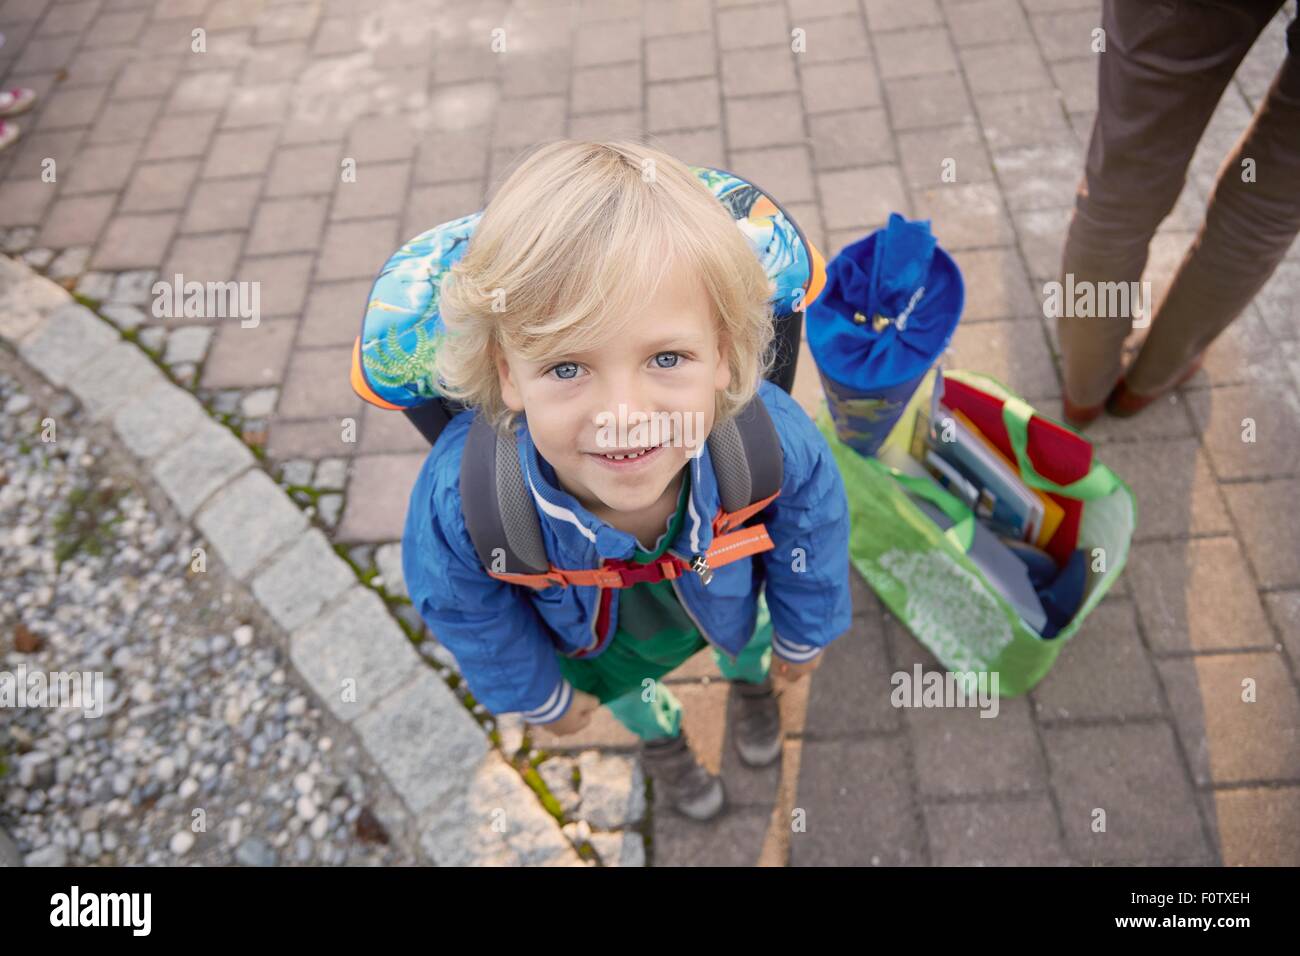 Portrait of young boy on first day of school, Bavaria, Germany Stock Photo